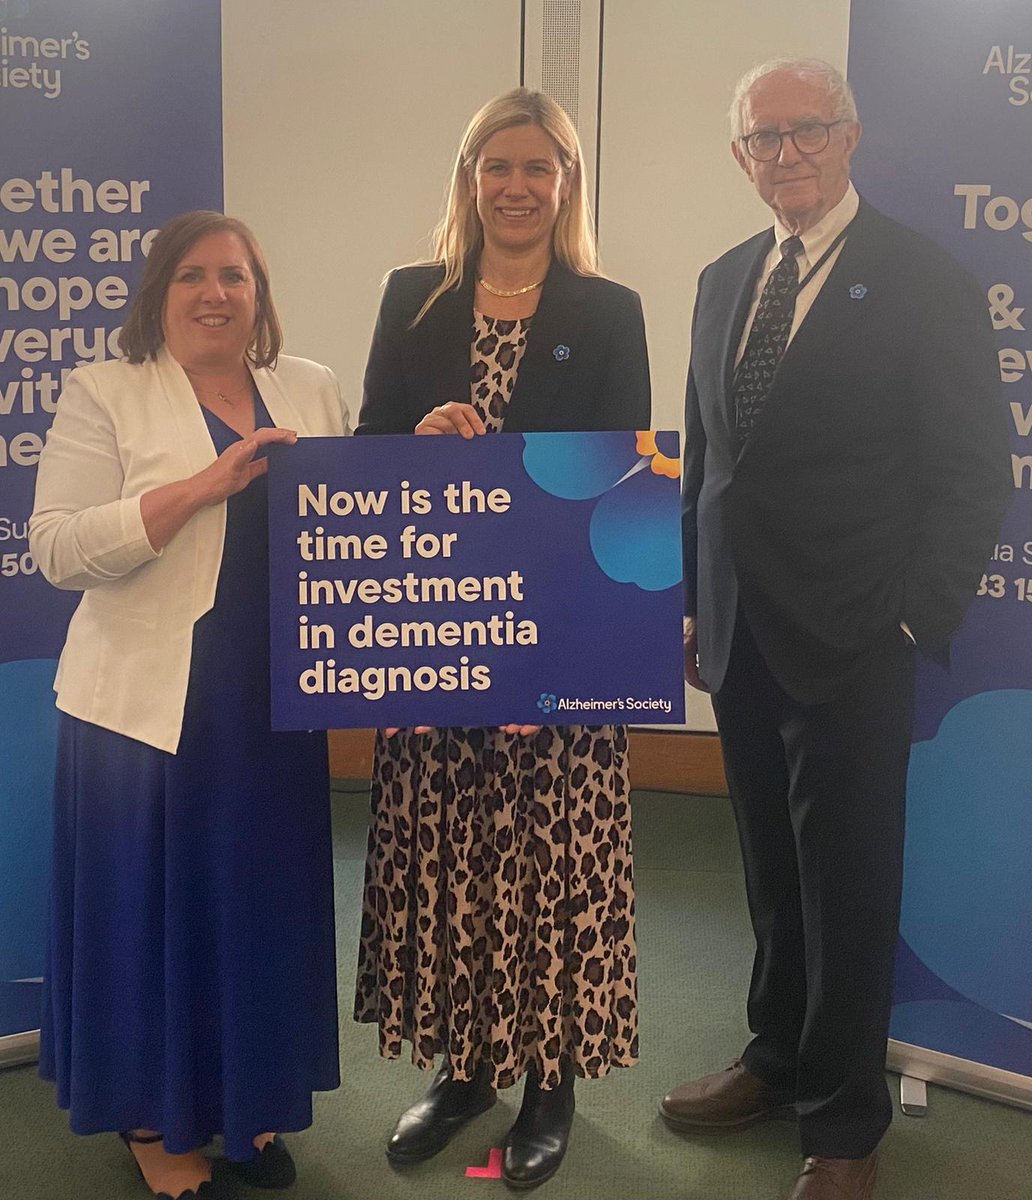 Great to meet with @alzheimerssoc in Parliament today as part of #DementiaActionWeek. People in Lewisham West and Penge & across the country are suffering without an early diagnosis and the support they need. We must end the diagnosis gap.